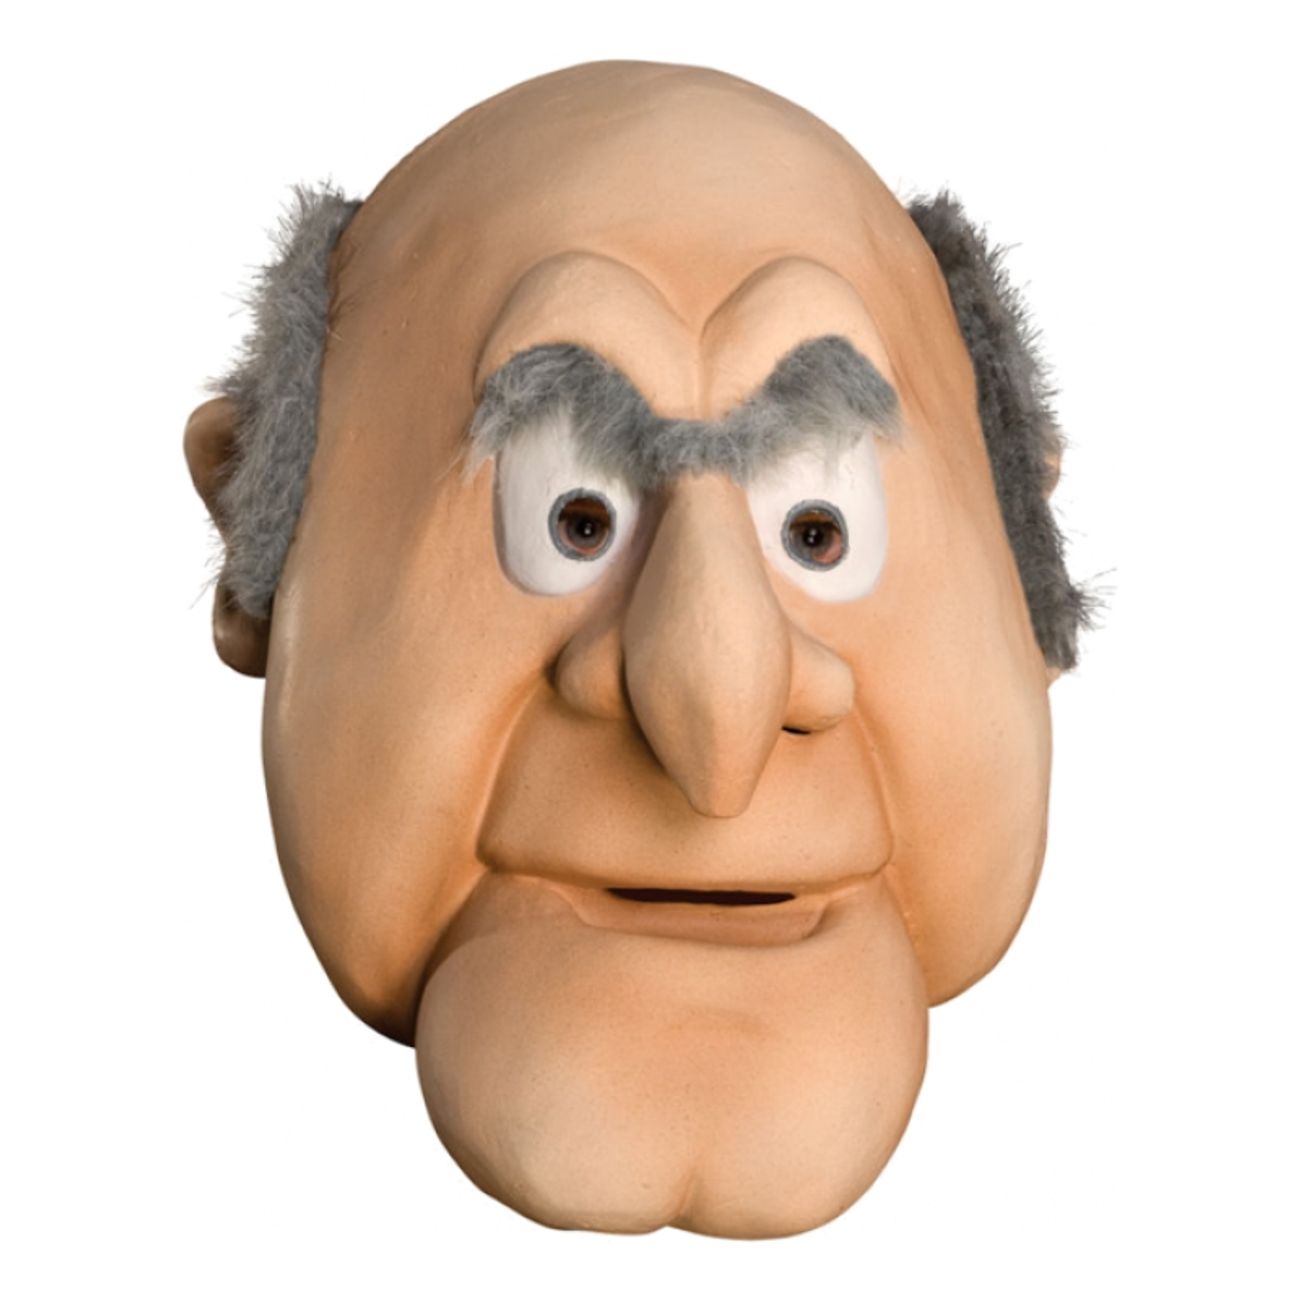 the-muppets-deluxe-statler-mask-1